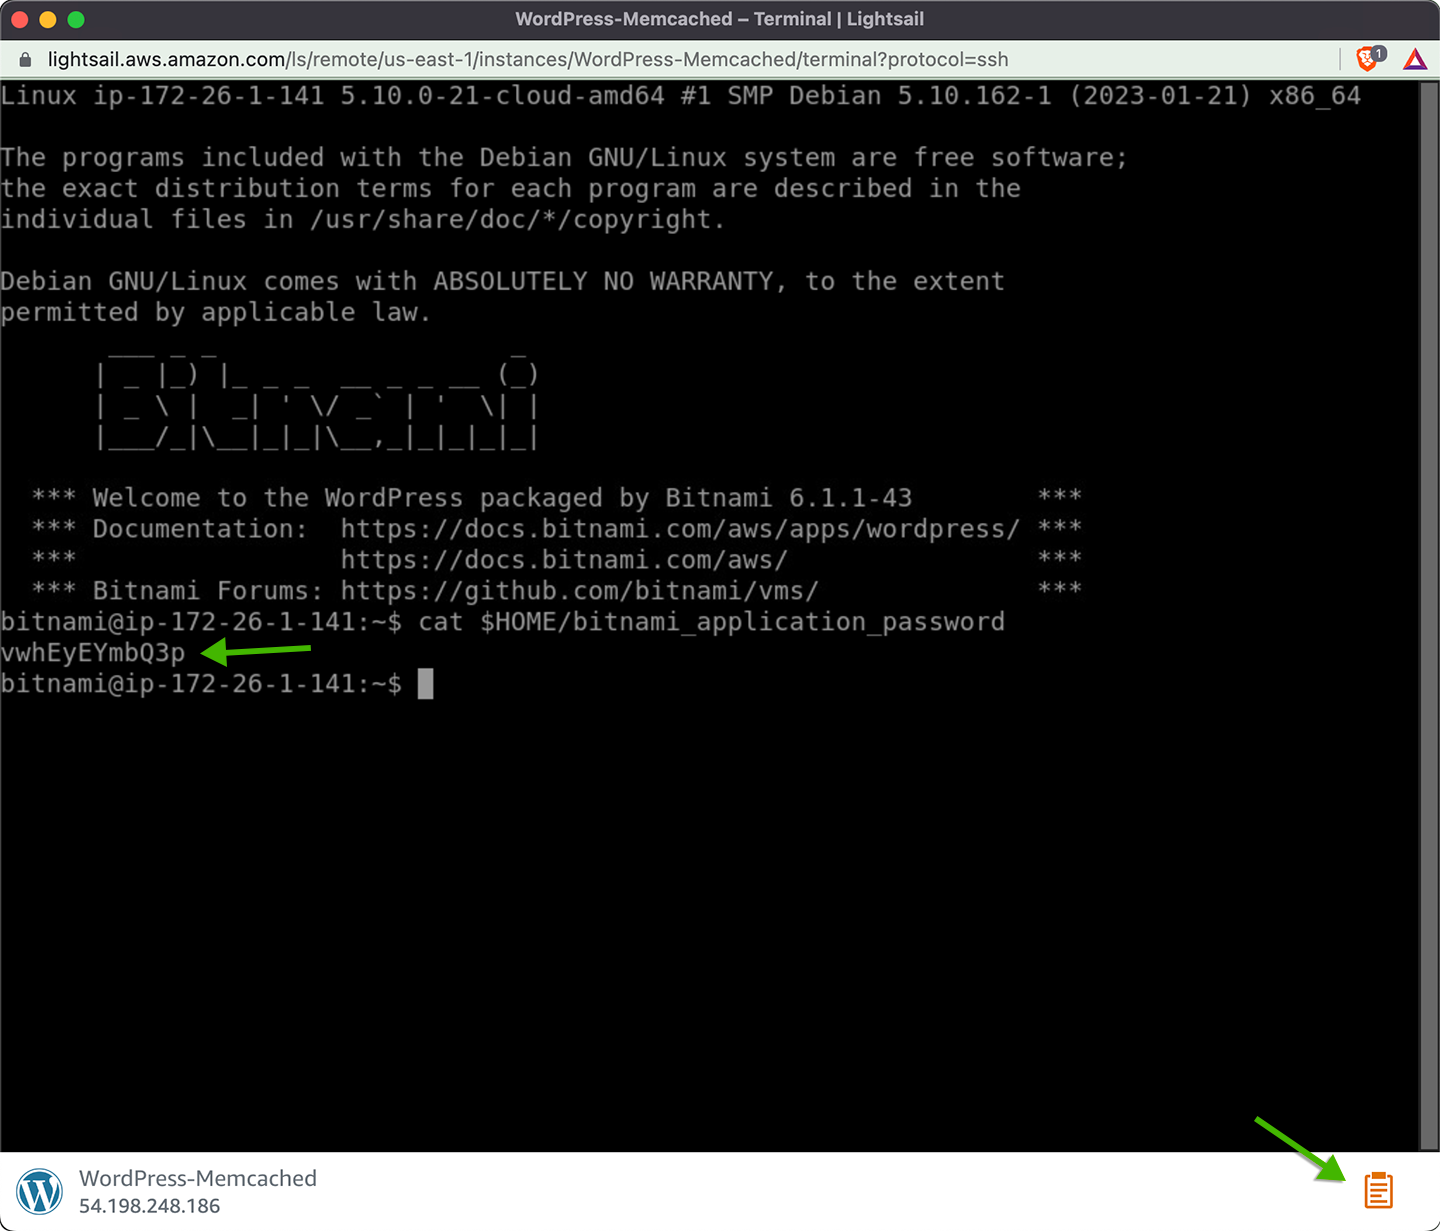 Screenshot of the Lightsail WordPress password in the in-browser terminal